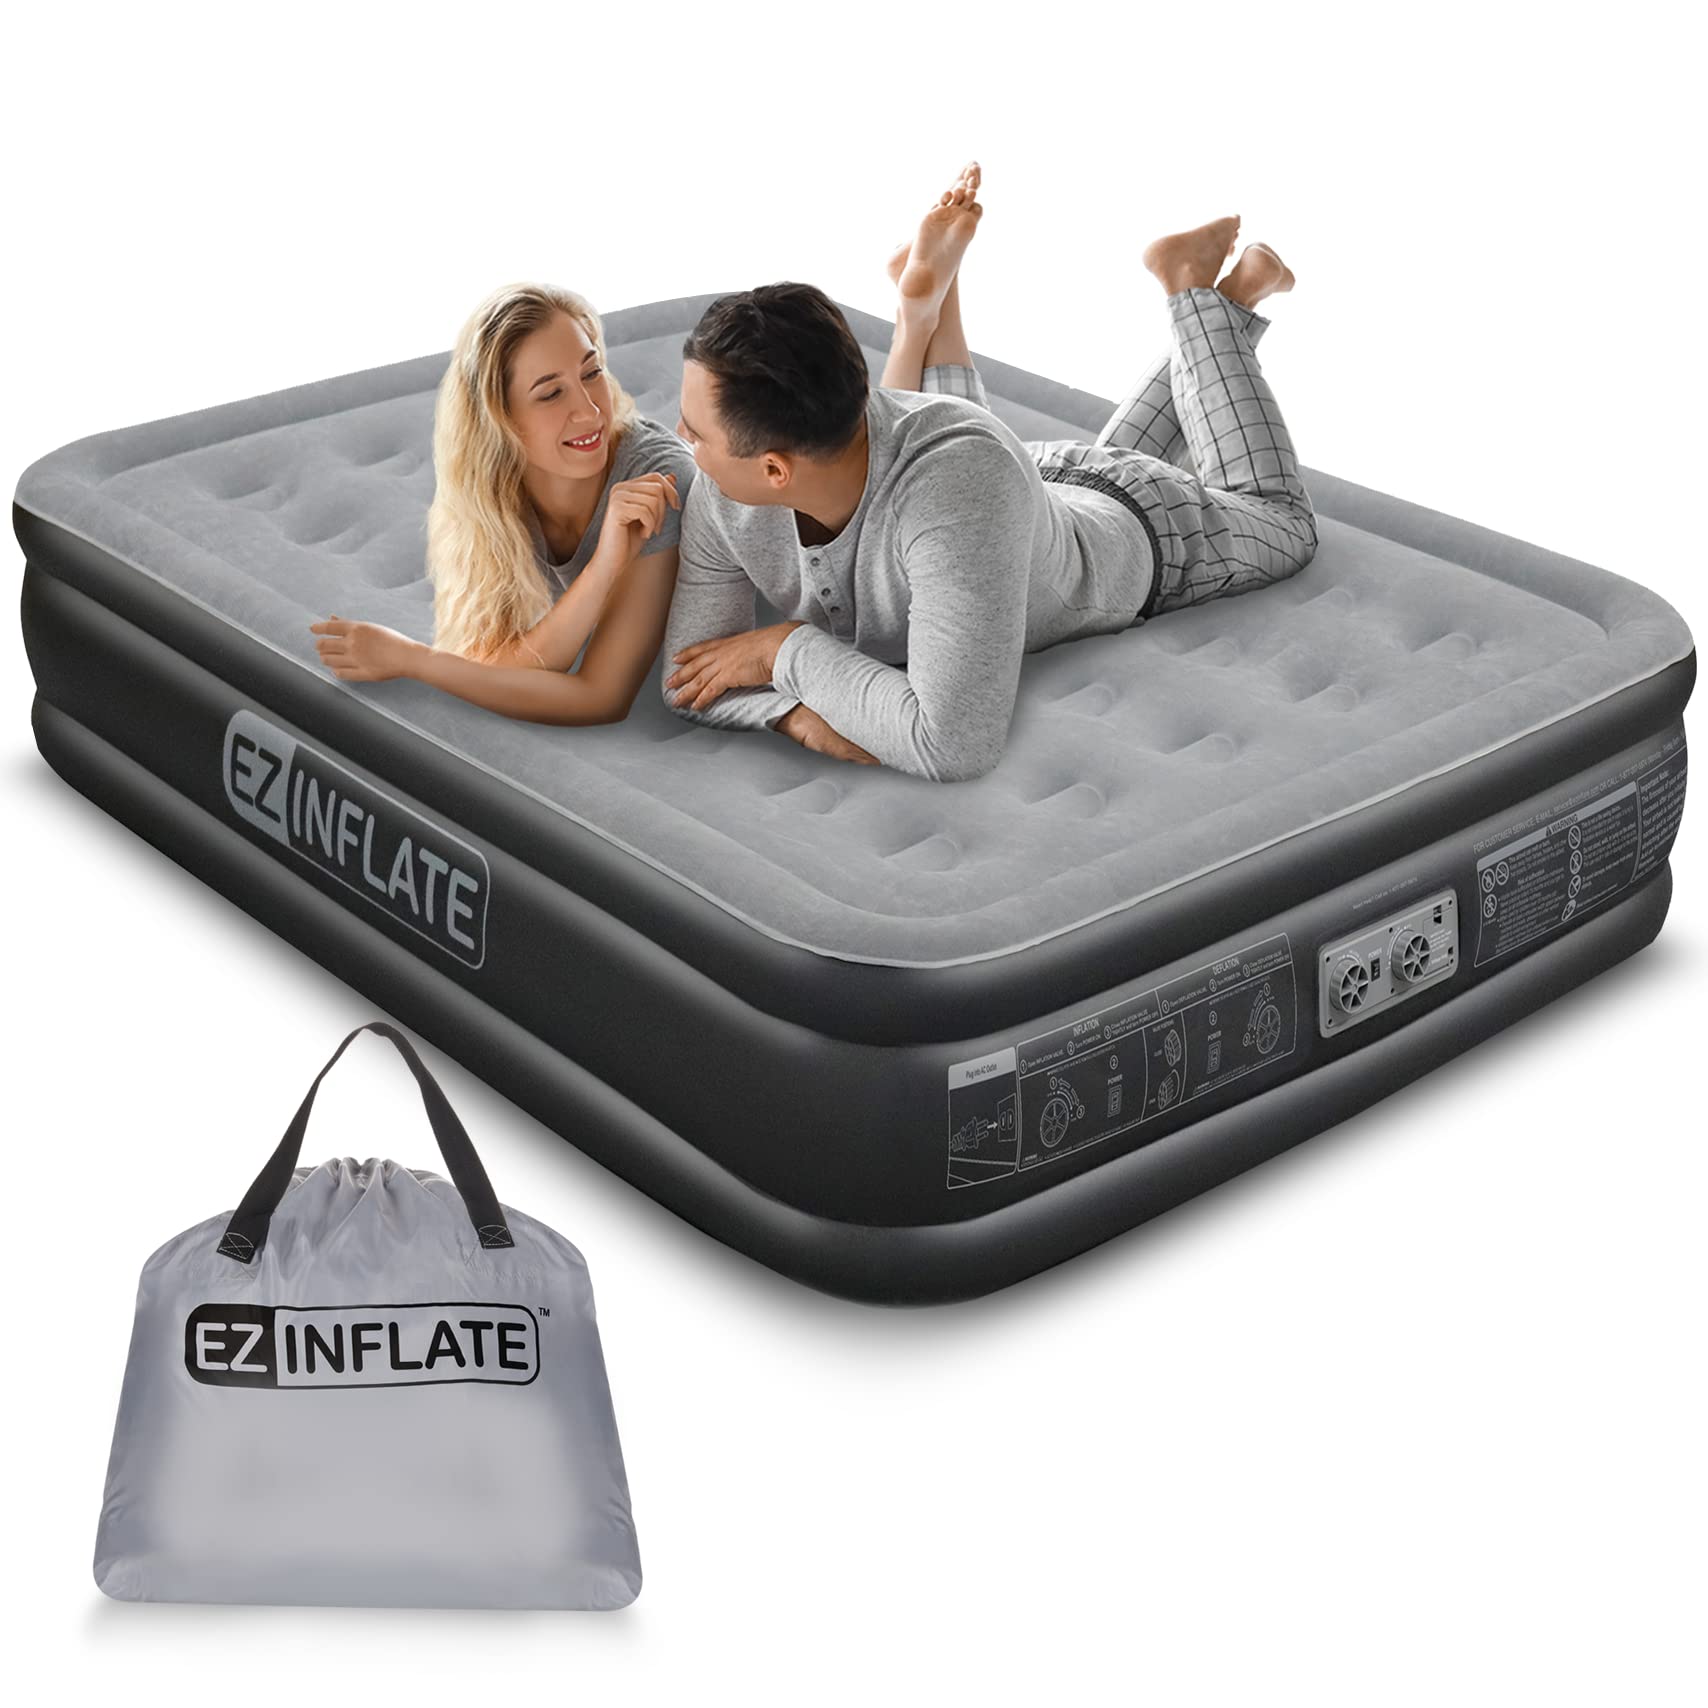 EZ INFLATE Air Mattress with Built in Pump - Queen Size Double-High Inflatable Mattress with Flocked Top - Easy Inflate, Water $26.3